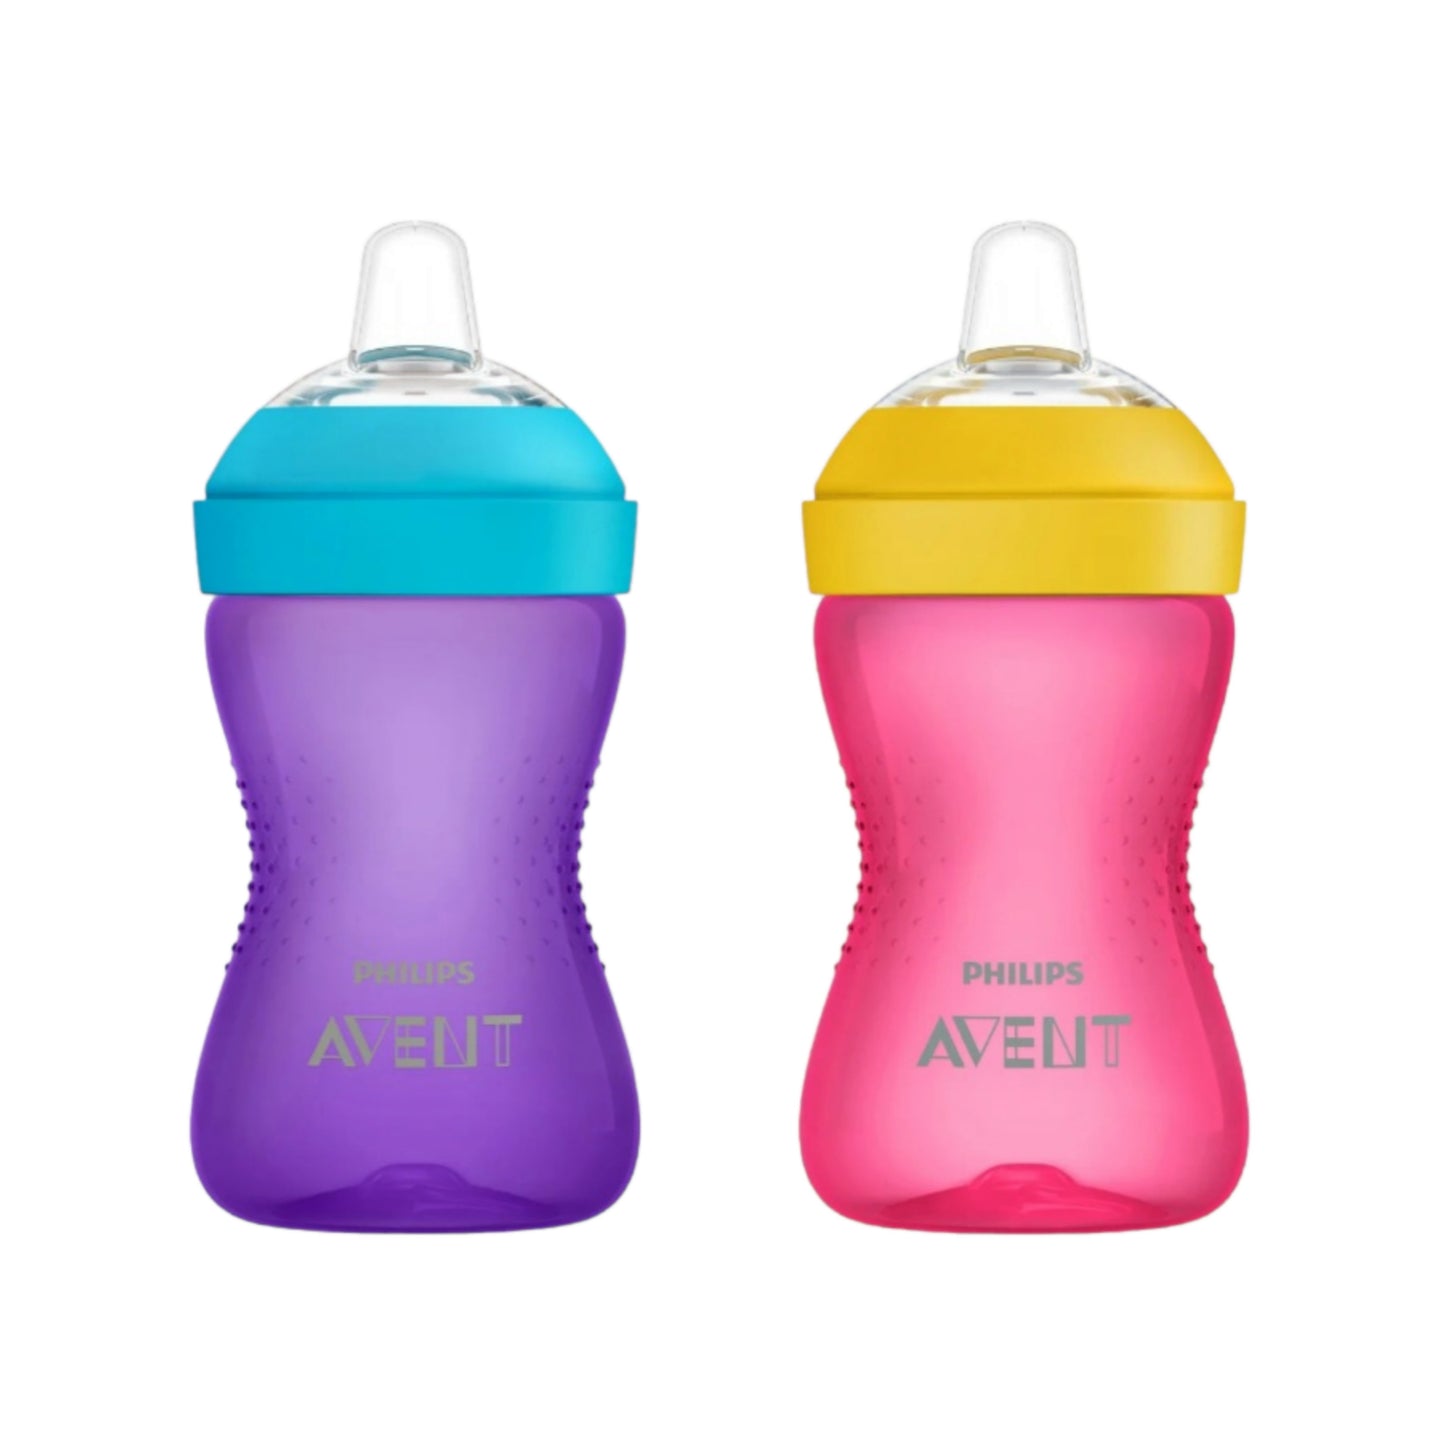 My Grippy Sippy Cups